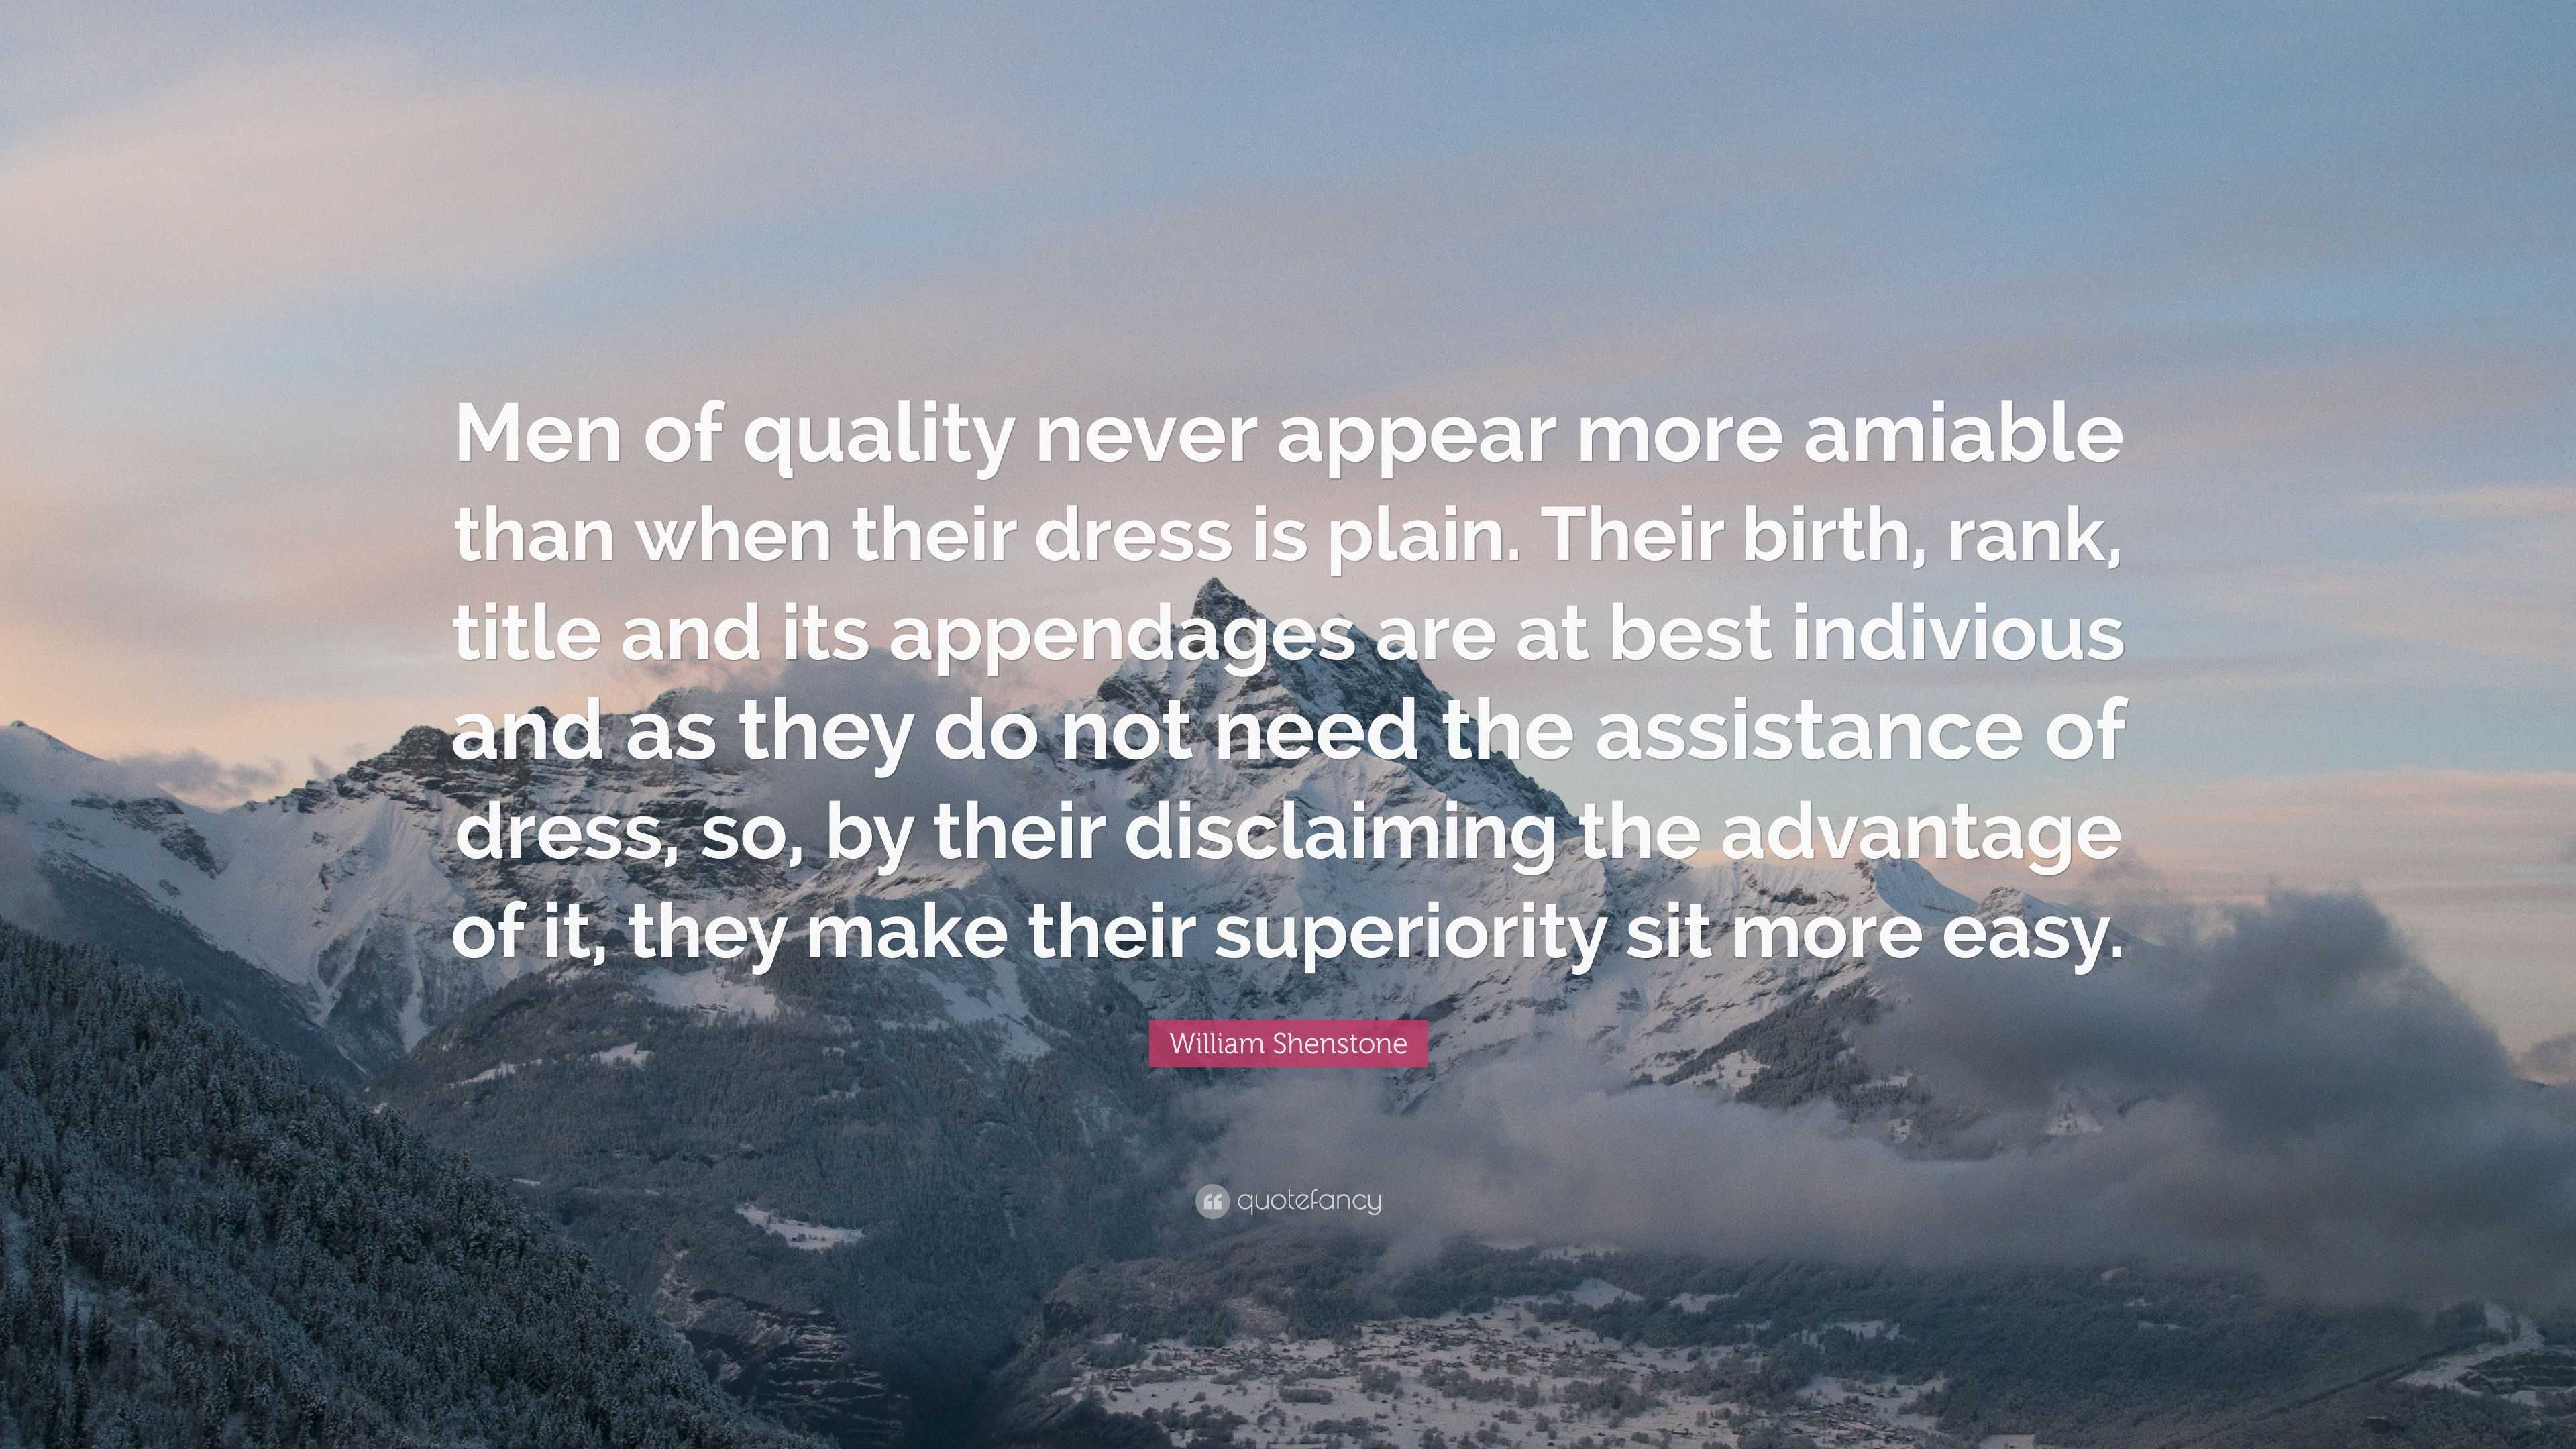 William Shenstone Quote: “Men of quality never appear more amiable than ...